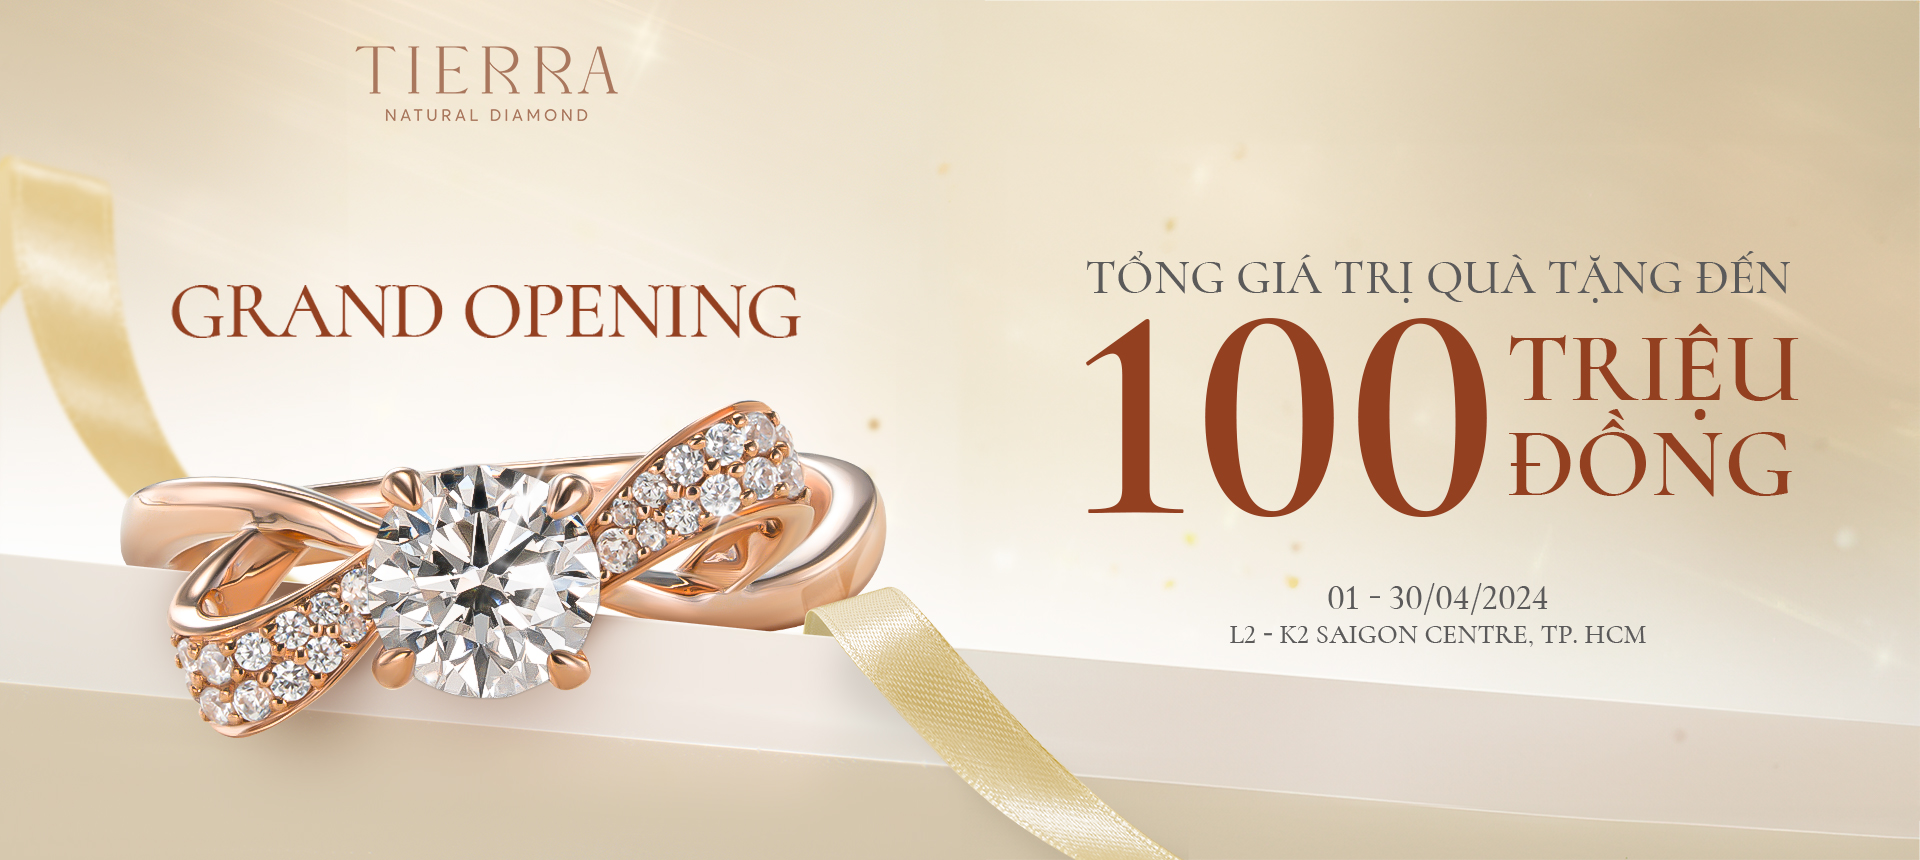 CELEBRATE THE GRAND OPENING OF TIERRA DIAMOND’S NEW BRANCH AT SAIGON CENTRE